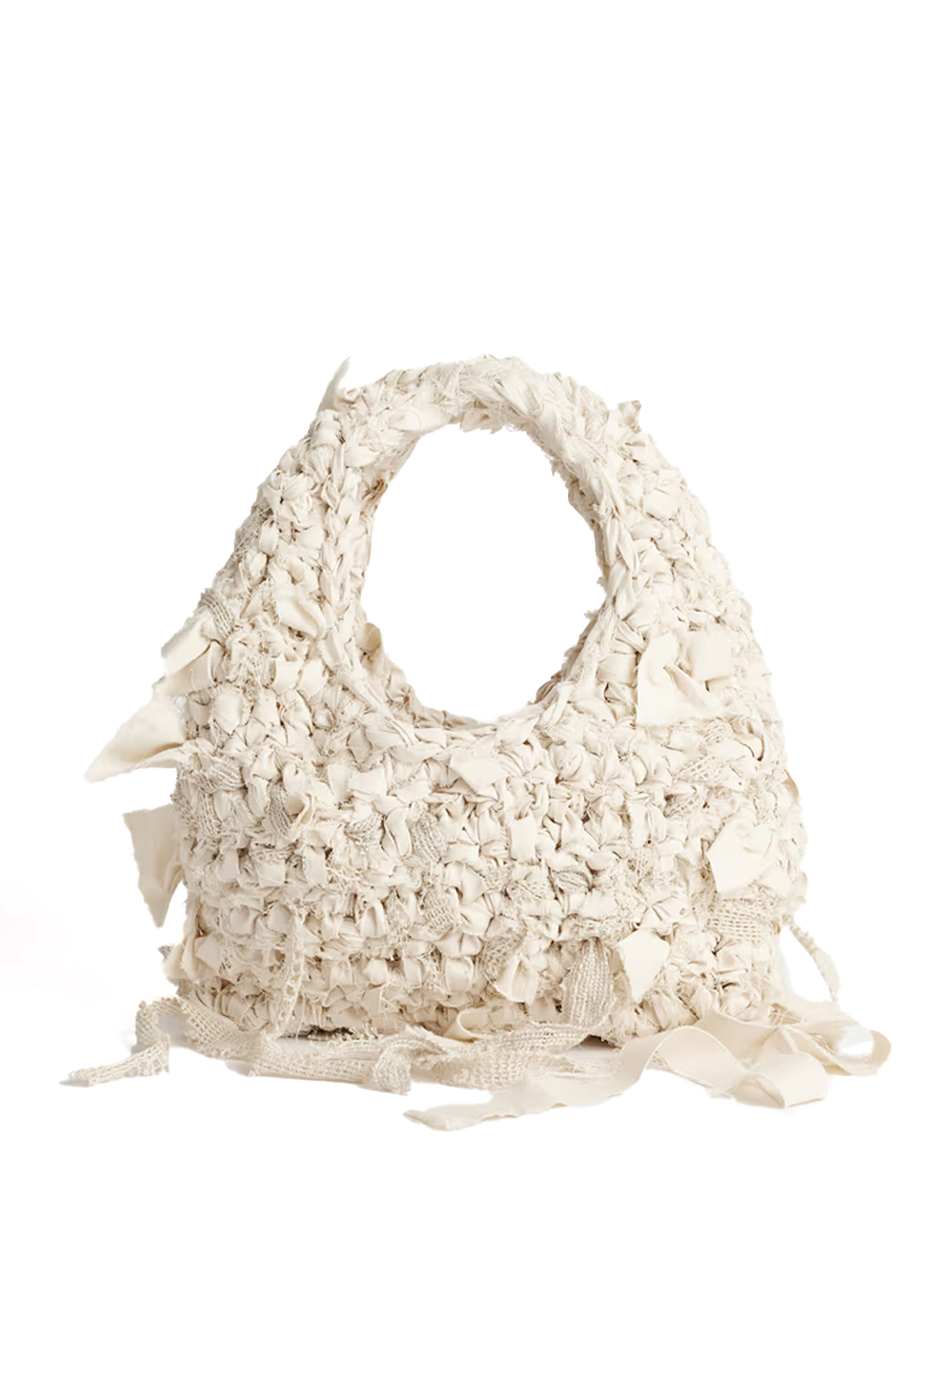 Our Legacy launches a limited edition of its crochet bags - HIGHXTAR.